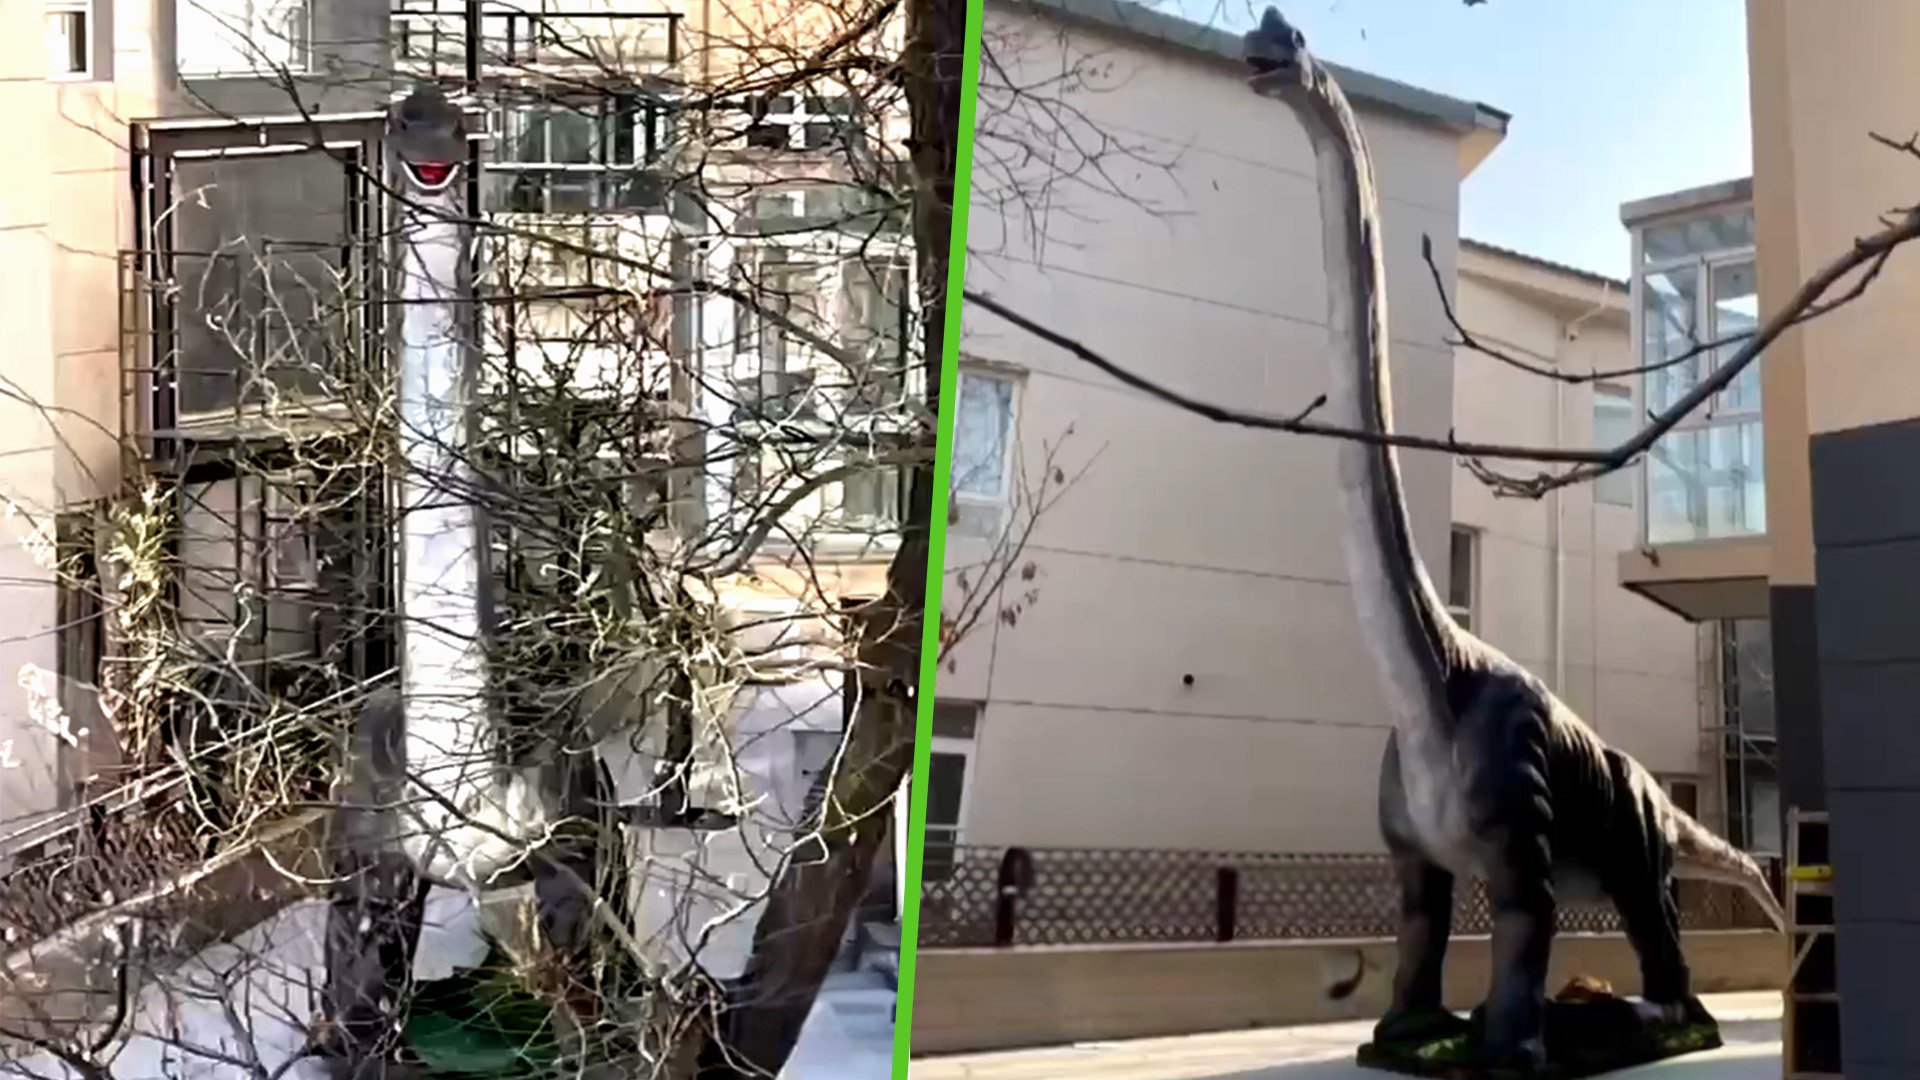 The man complained about his neighbour’s 15-meter-high dinosaur model, stating that it was “scary” and causing mental torture. 
Photo: SCMP composite/Weibo